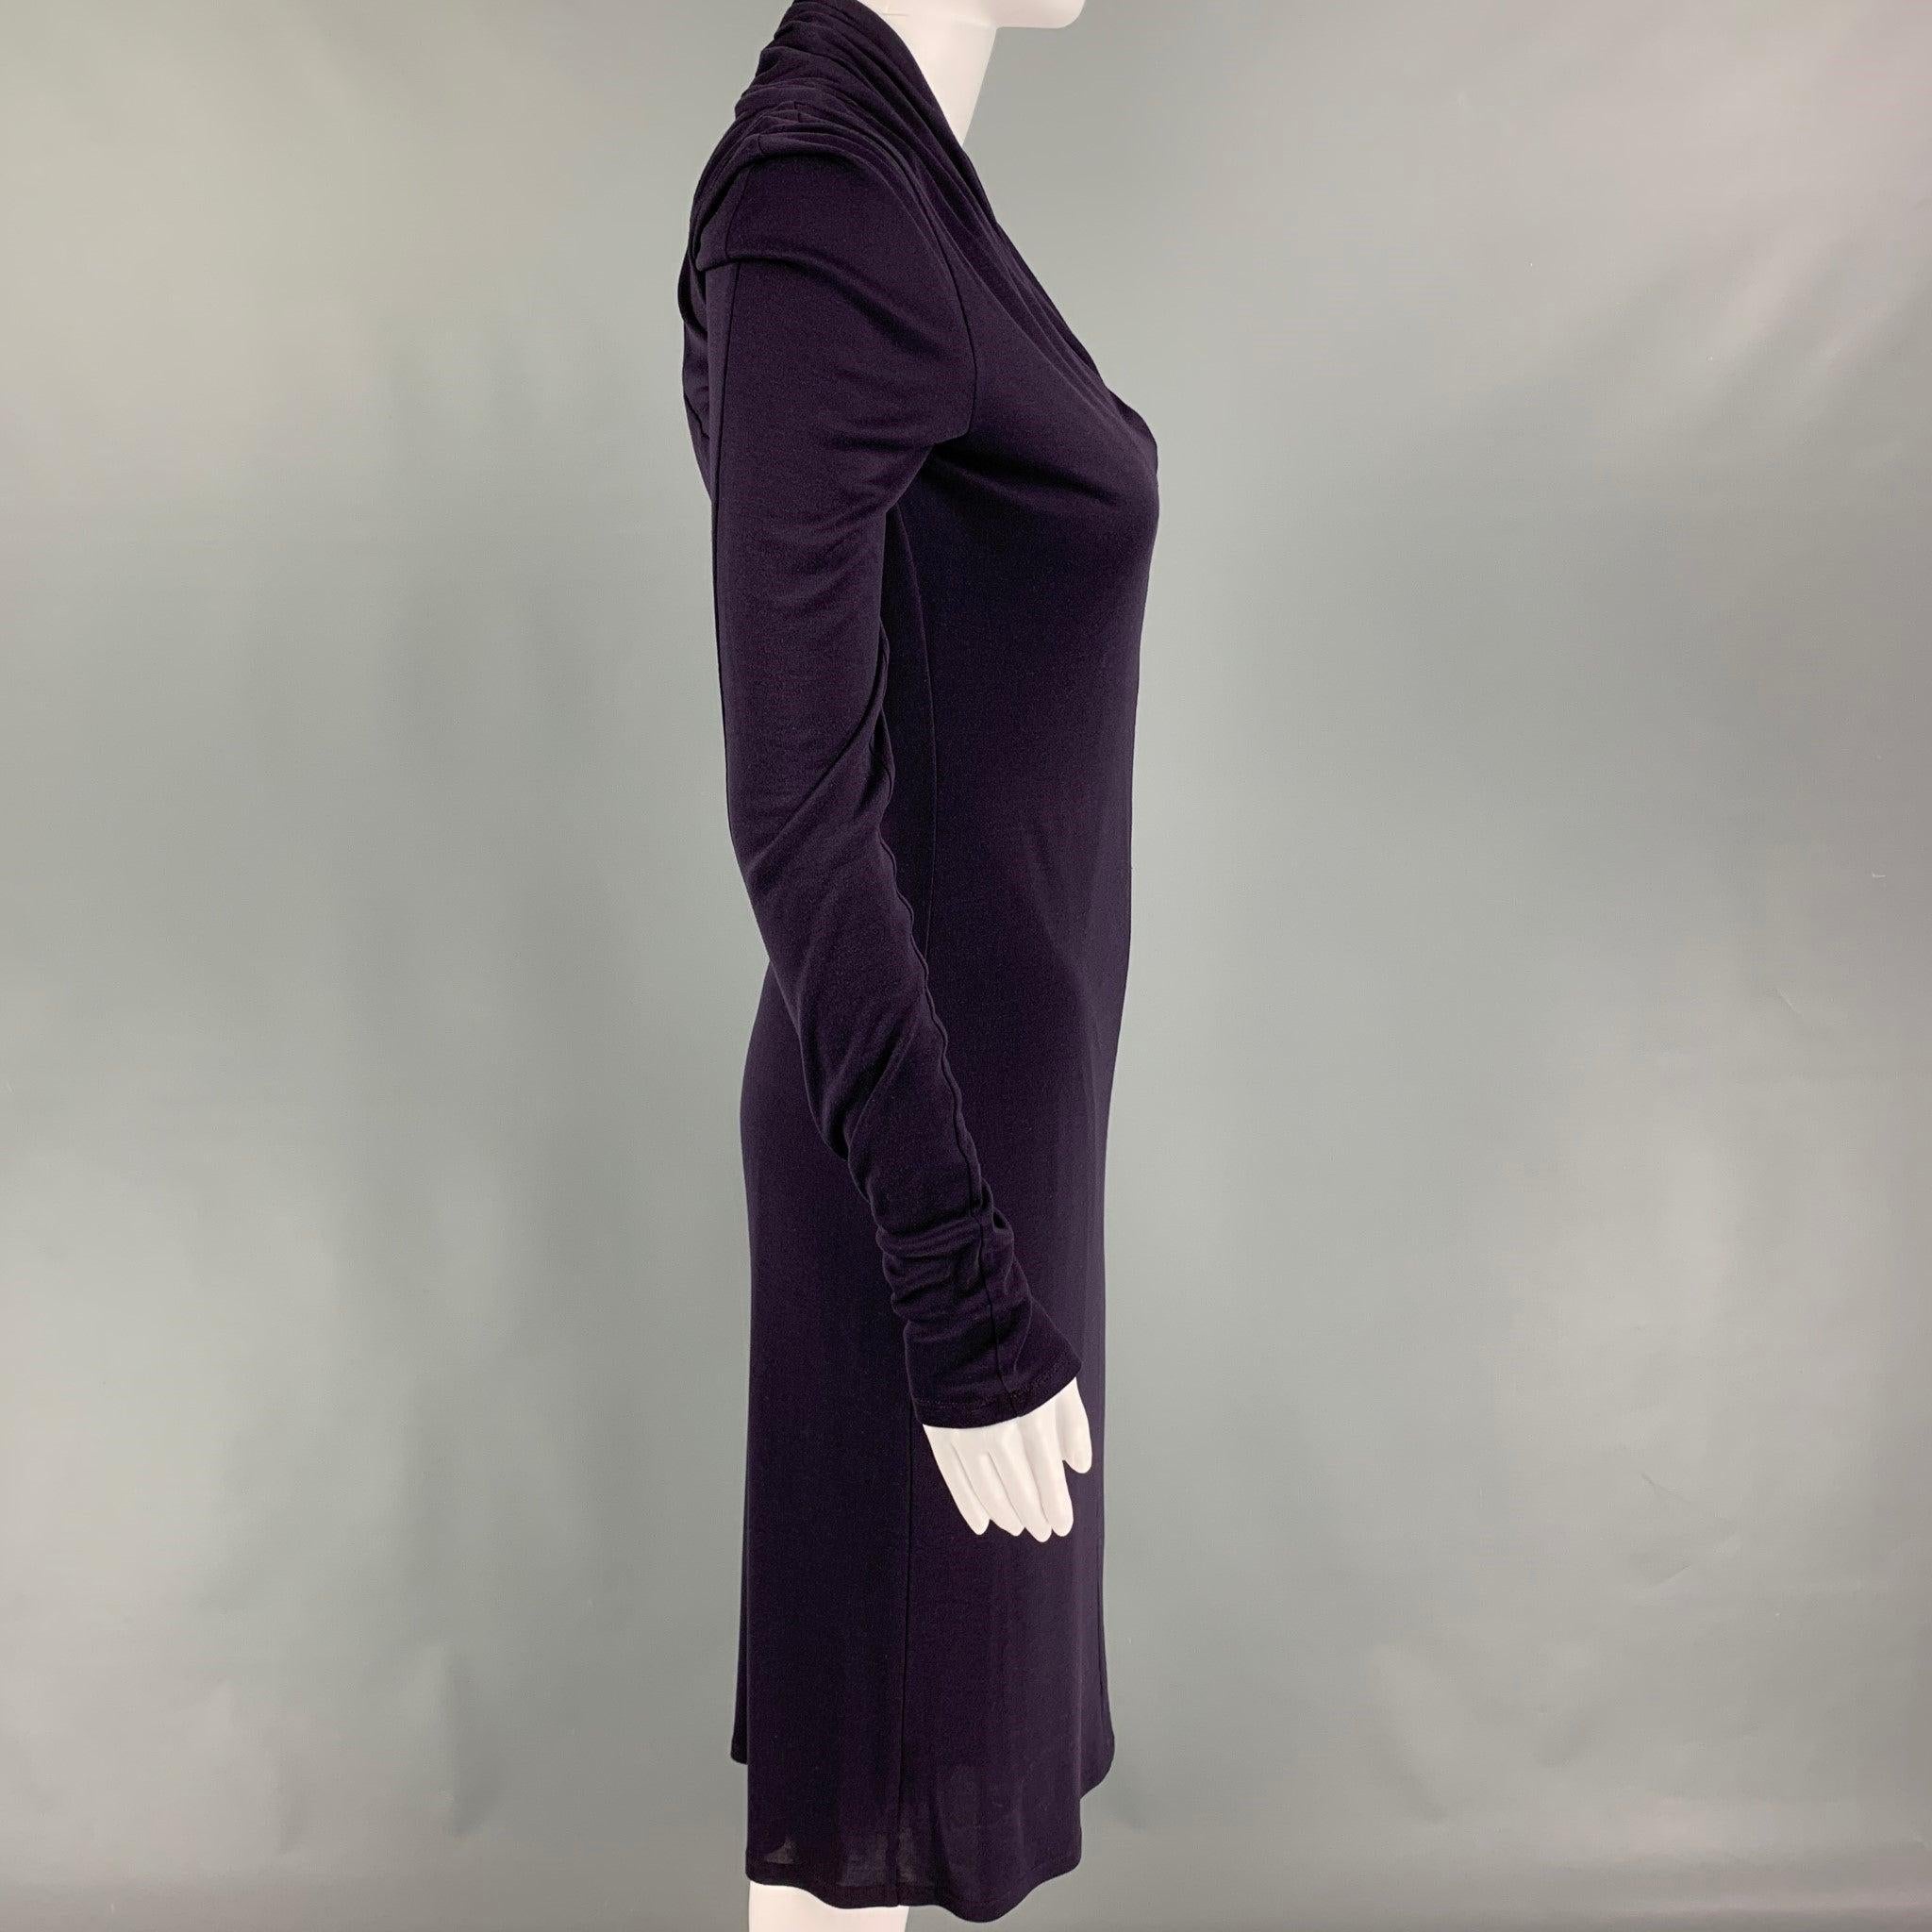 ALEXANDER McQUEEN dress comes in a purple viscose featuring long sleeve and a v-neck. Made in Italy.
Very Good
Pre-Owned Condition. light wear at front. As-is. 

Marked:  42 

Measurements: 
 
Shoulder: 16 inches Bust: 30 inches Waist: 25 inches